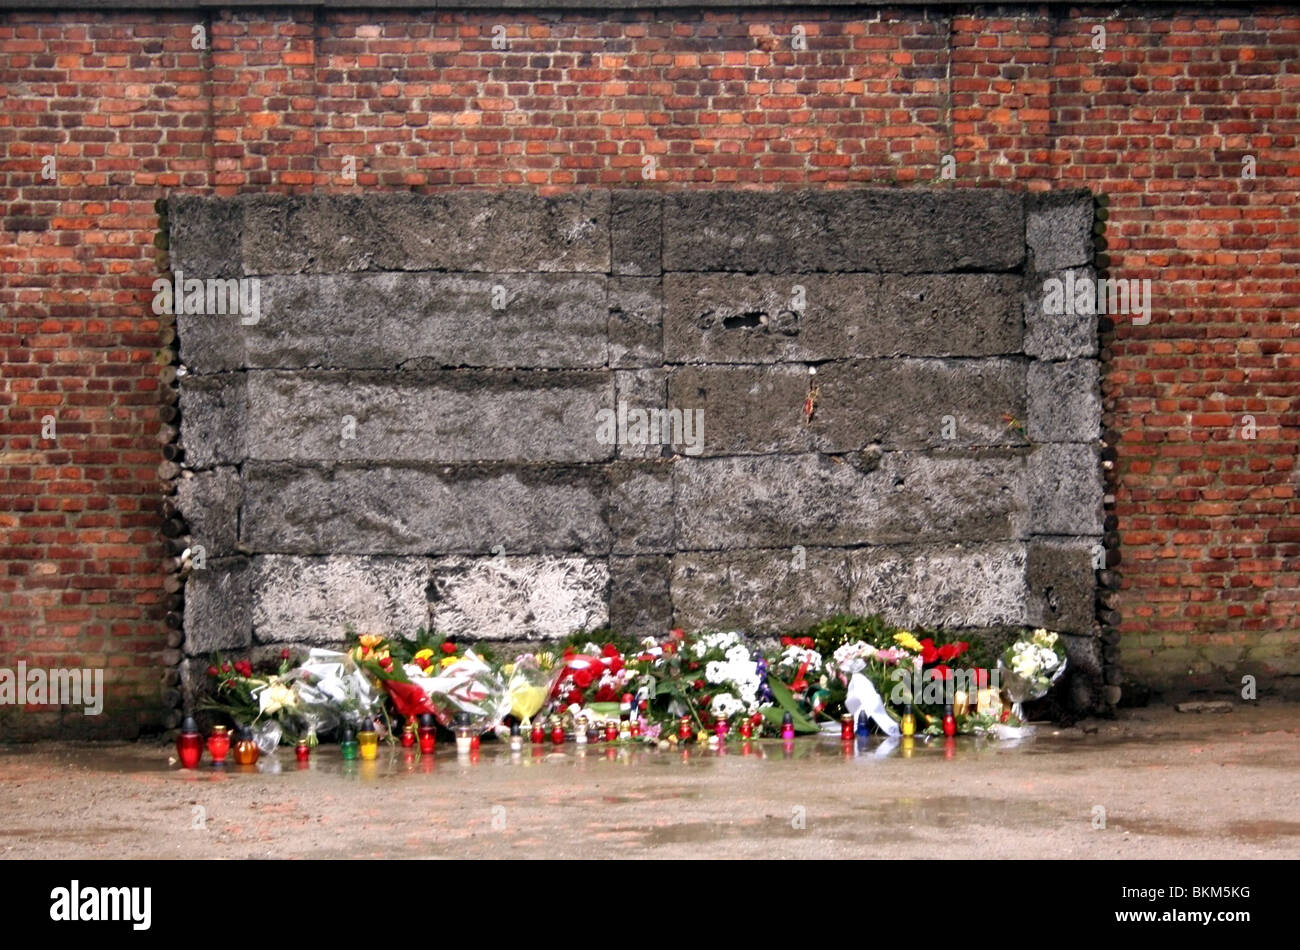 Execution wall Auschwitz Nazi concentration death camp. Stock Photo